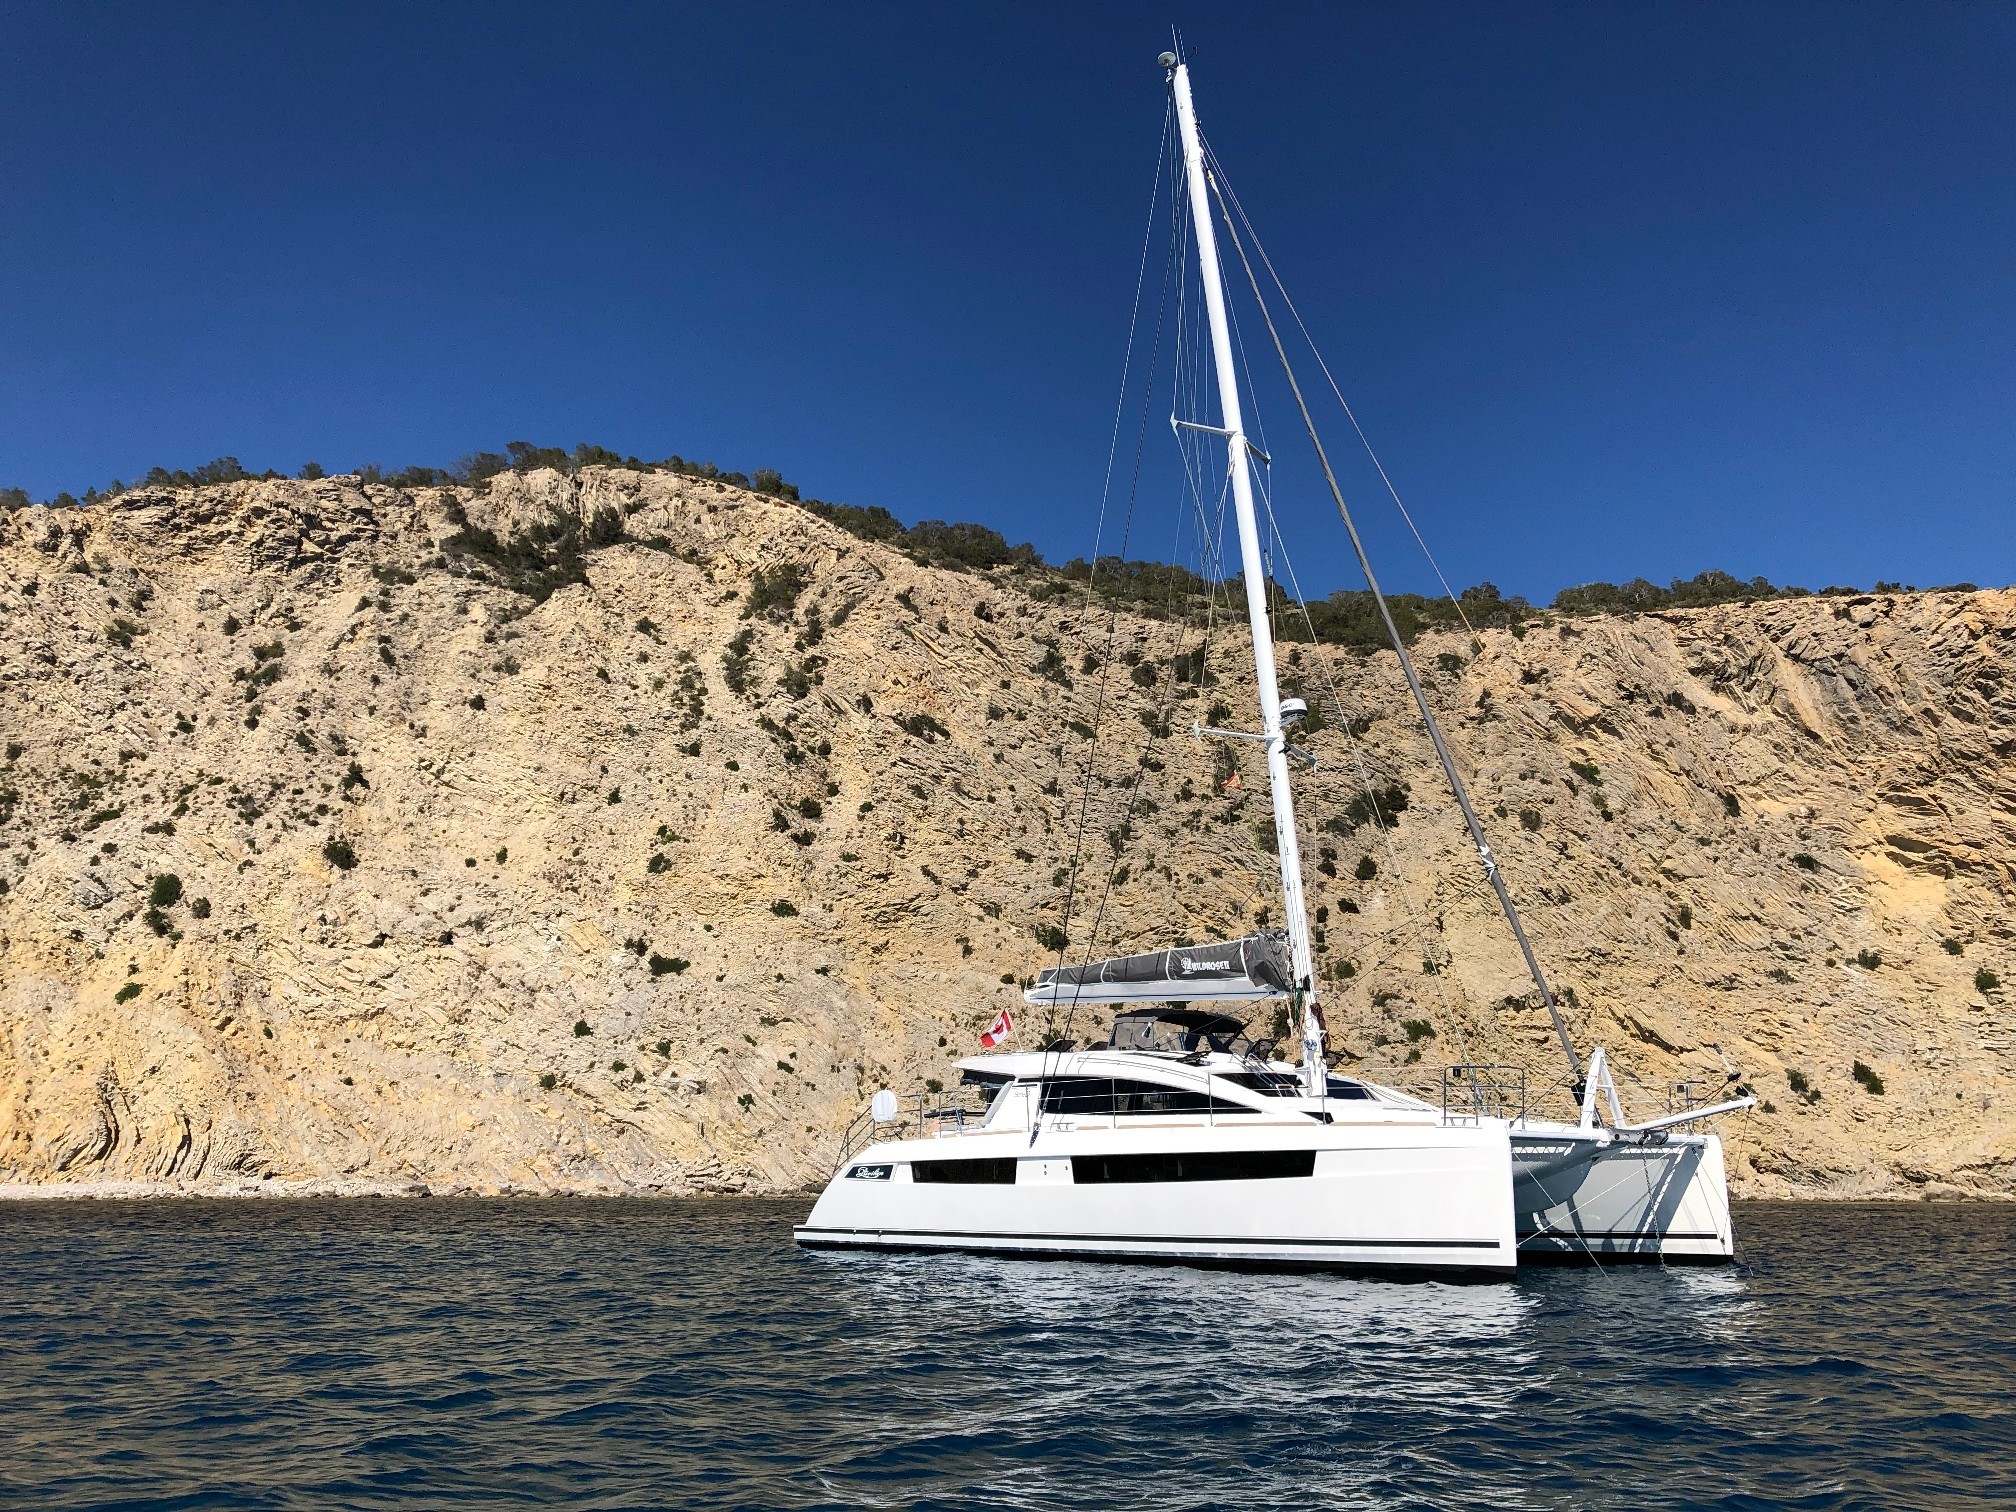 Used Sail Catamaran for Sale 2019 Series 5 Boat Highlights